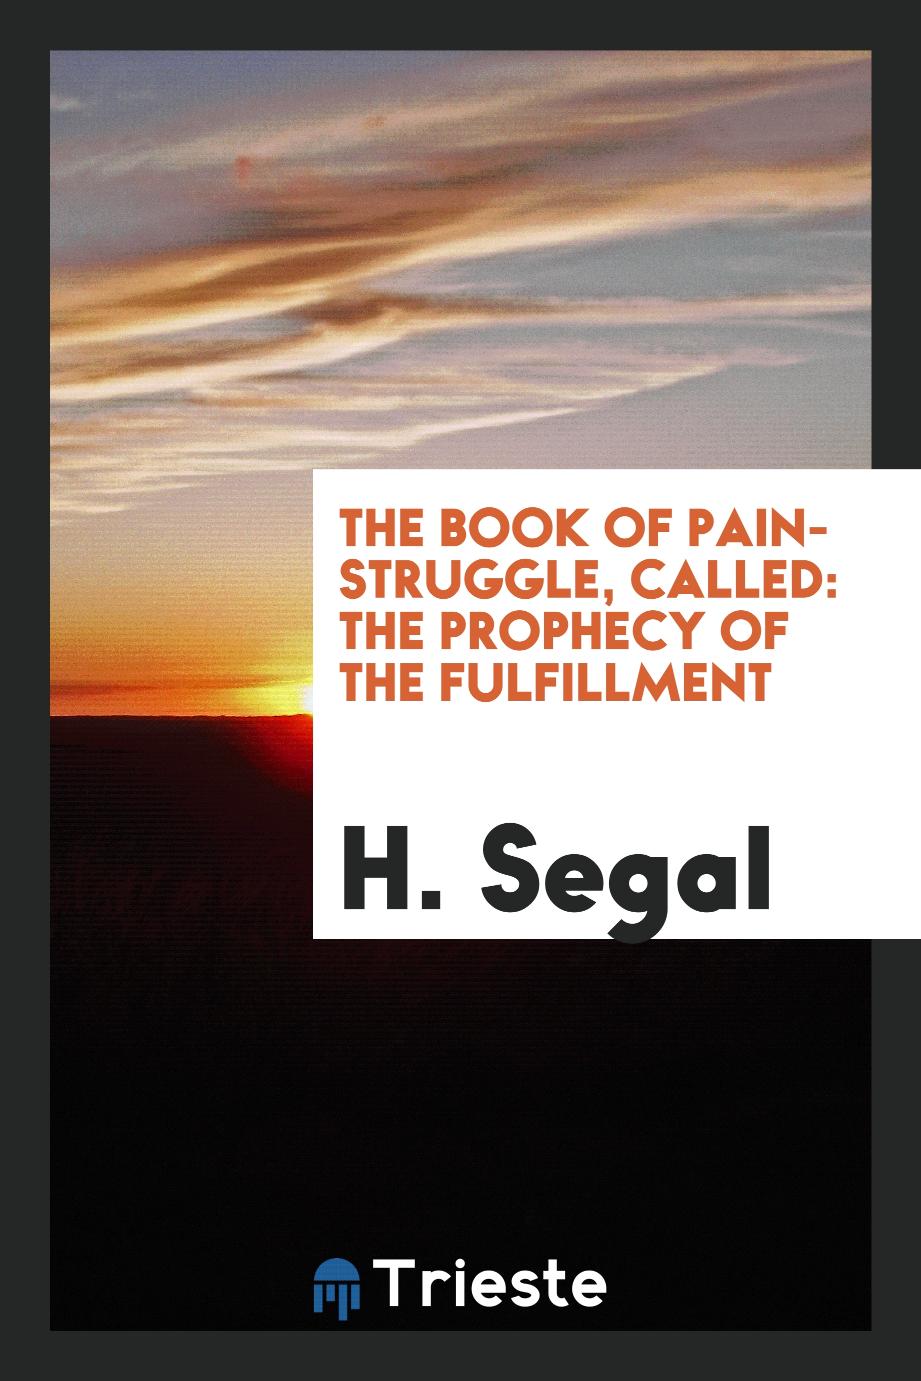 The Book of Pain-Struggle, Called: The Prophecy of the Fulfillment